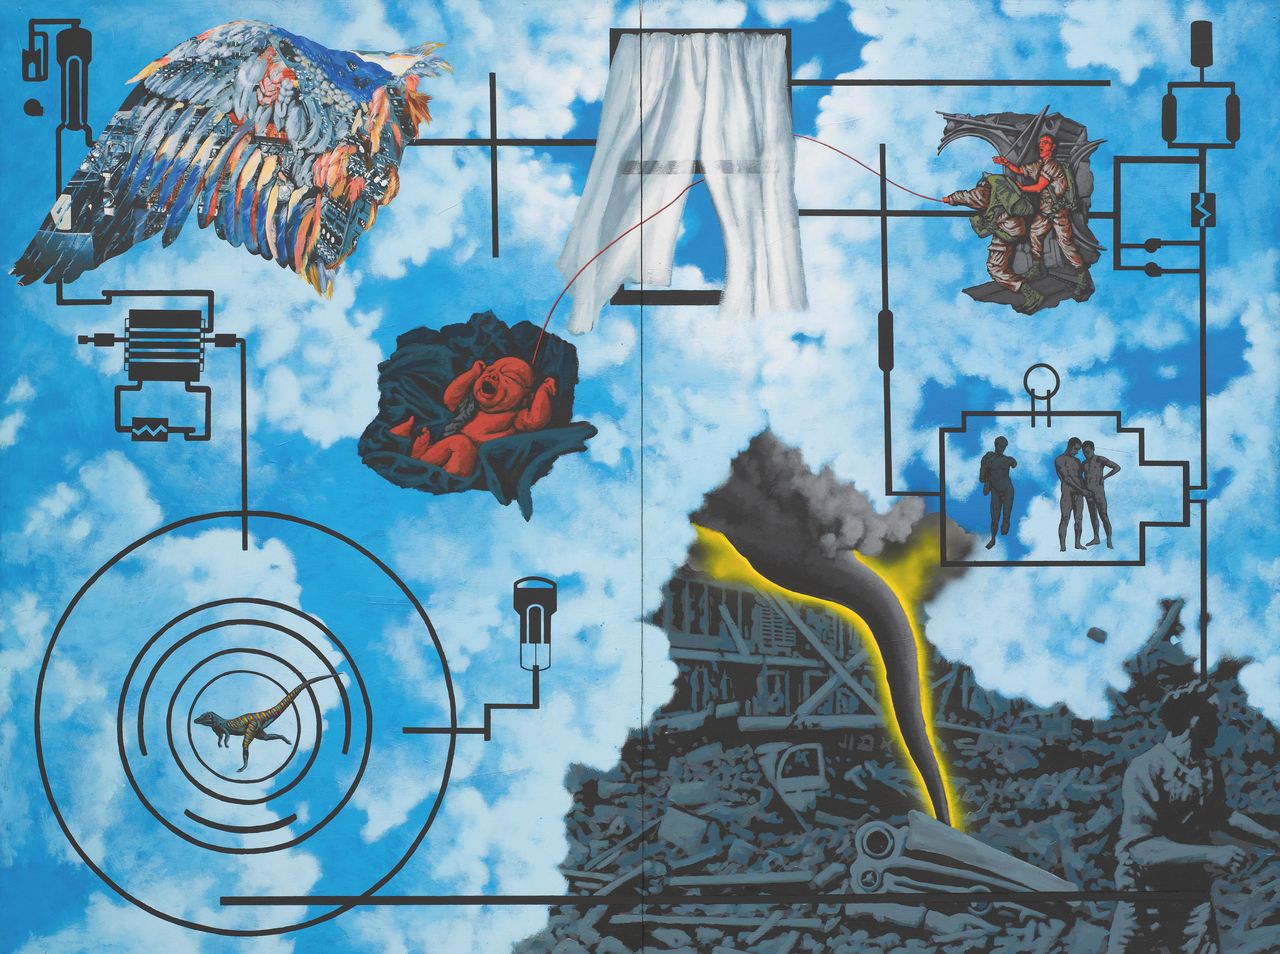 David Wojnarowicz (1954–1992), Wind (For Peter Hujar), 1987. Acrylic and collaged paper on composition board, two panels, 72 × 96 in. (182.9 × 243.8 cm)